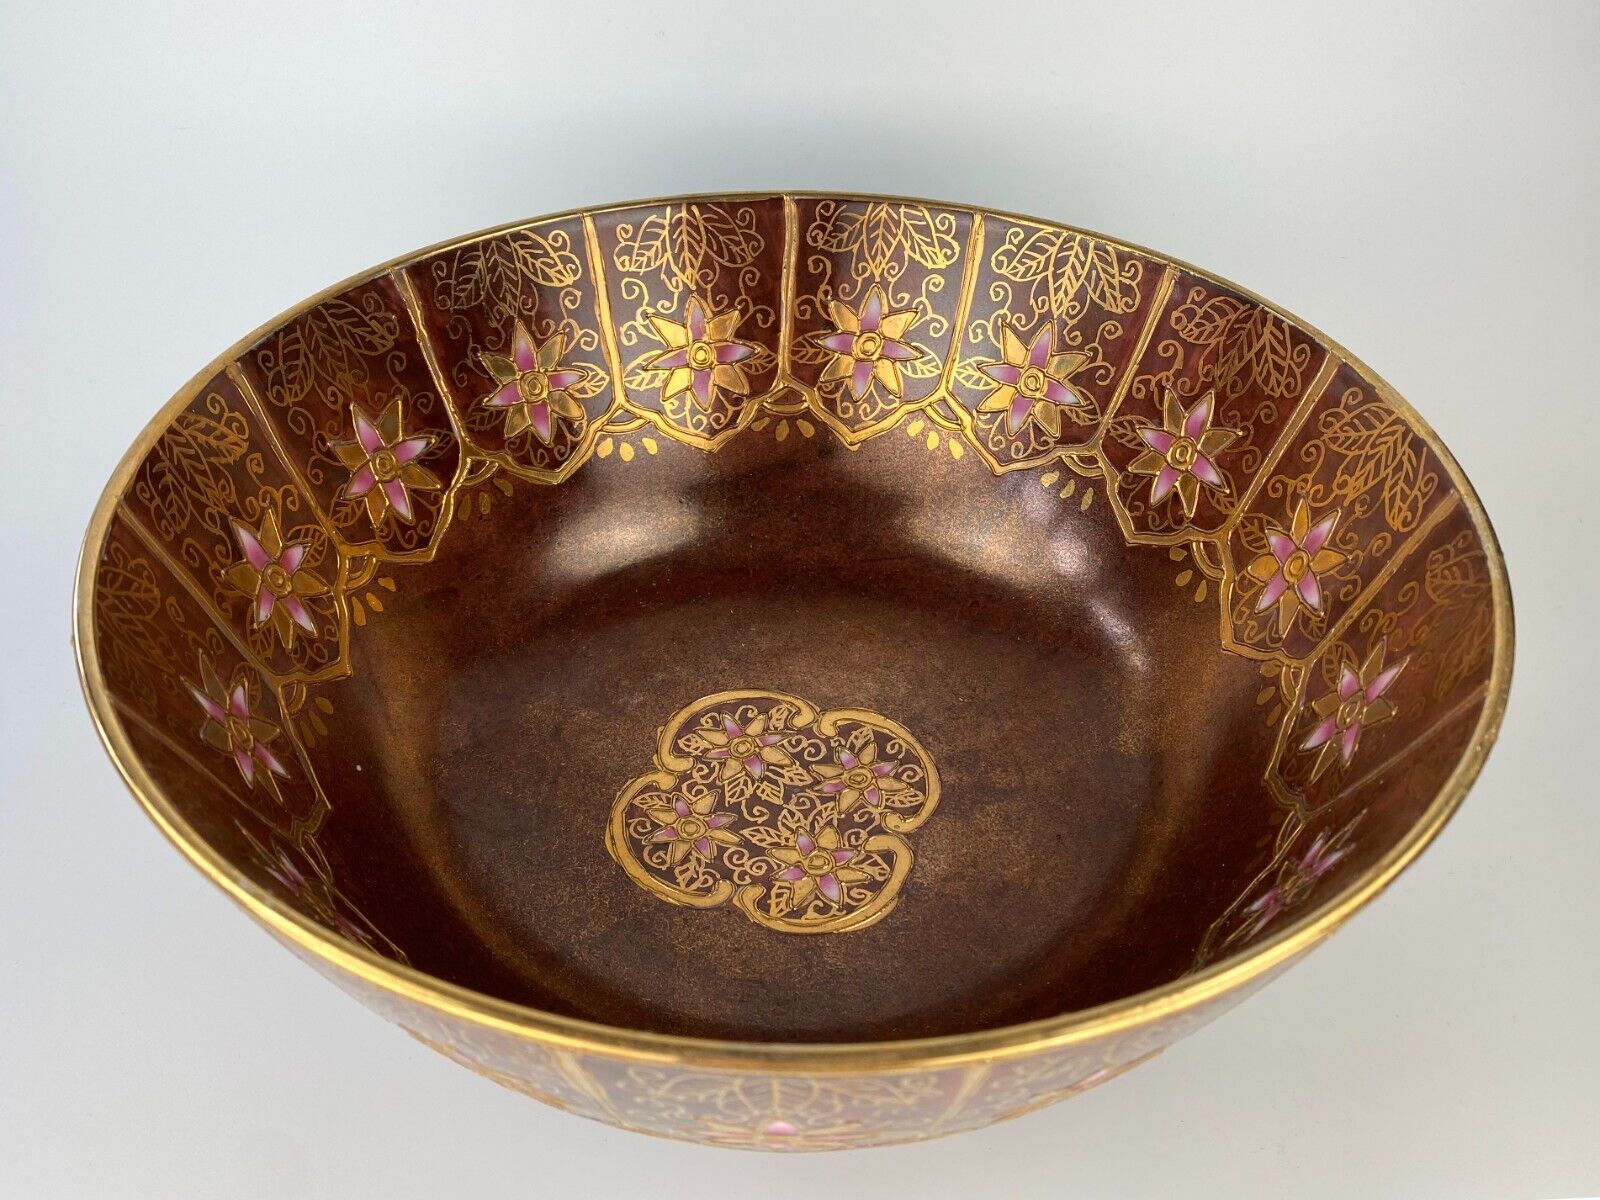 Large Vintage Hand-Painted Chinese Bowl — Gold with Metallic Floral Designs